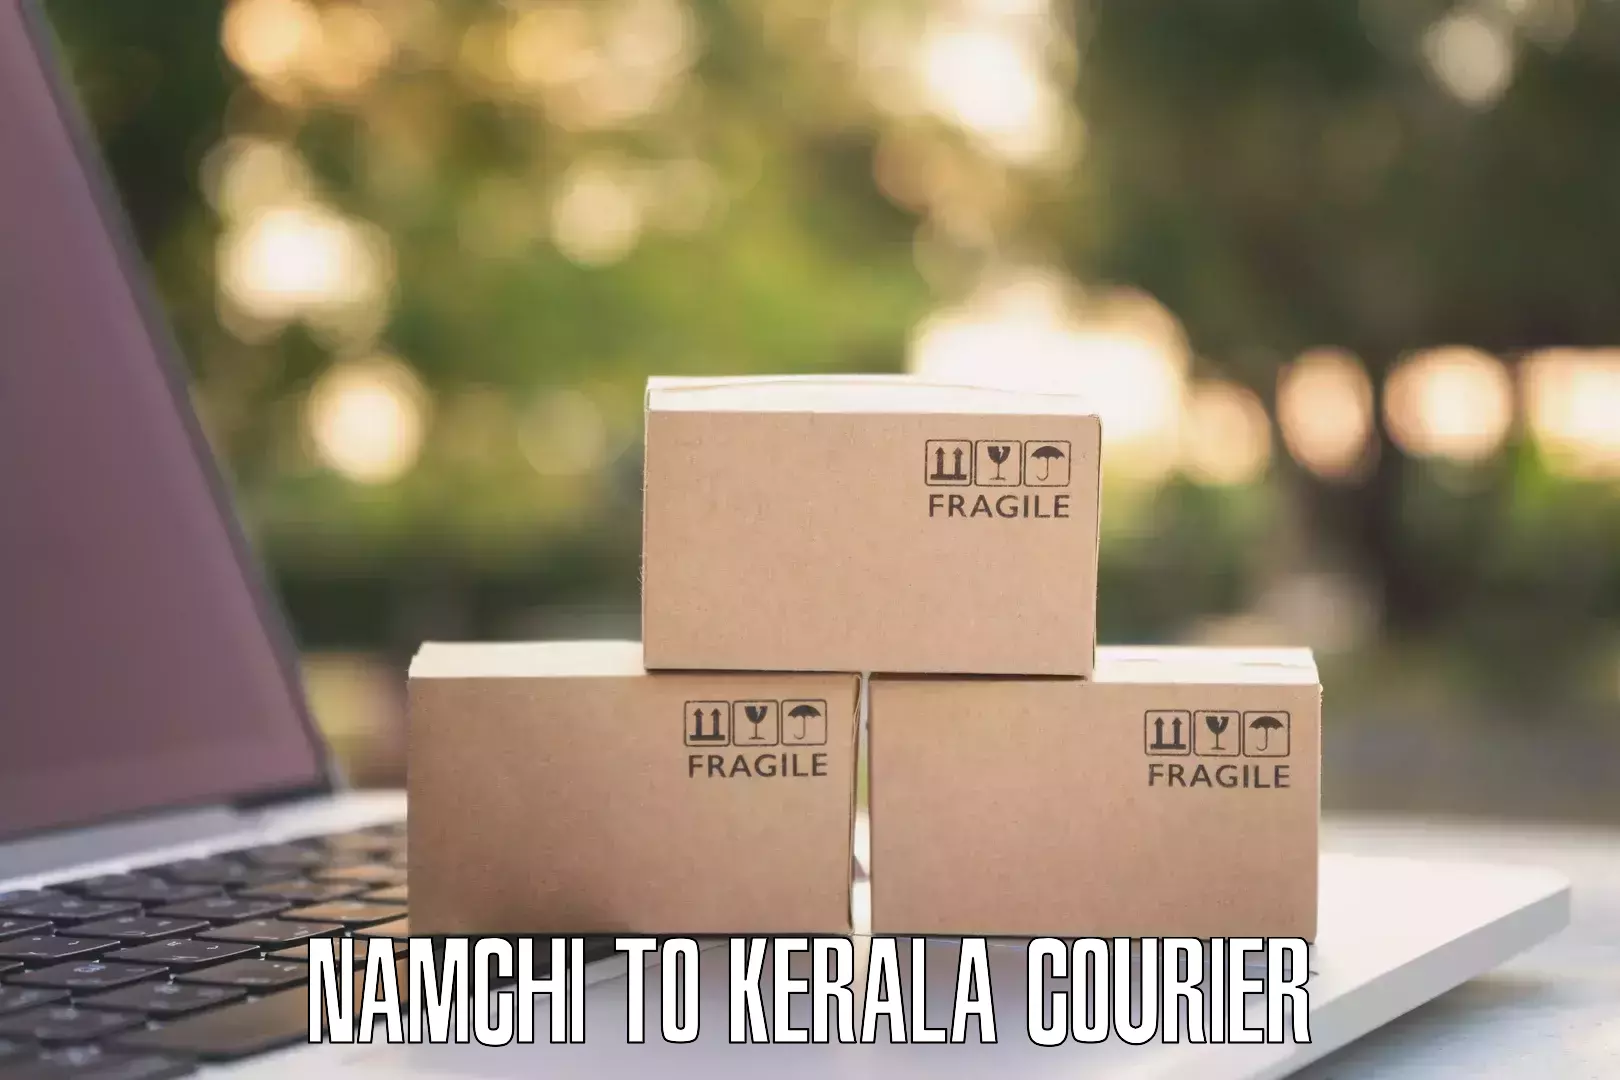 Courier rate comparison Namchi to Cochin University of Science and Technology